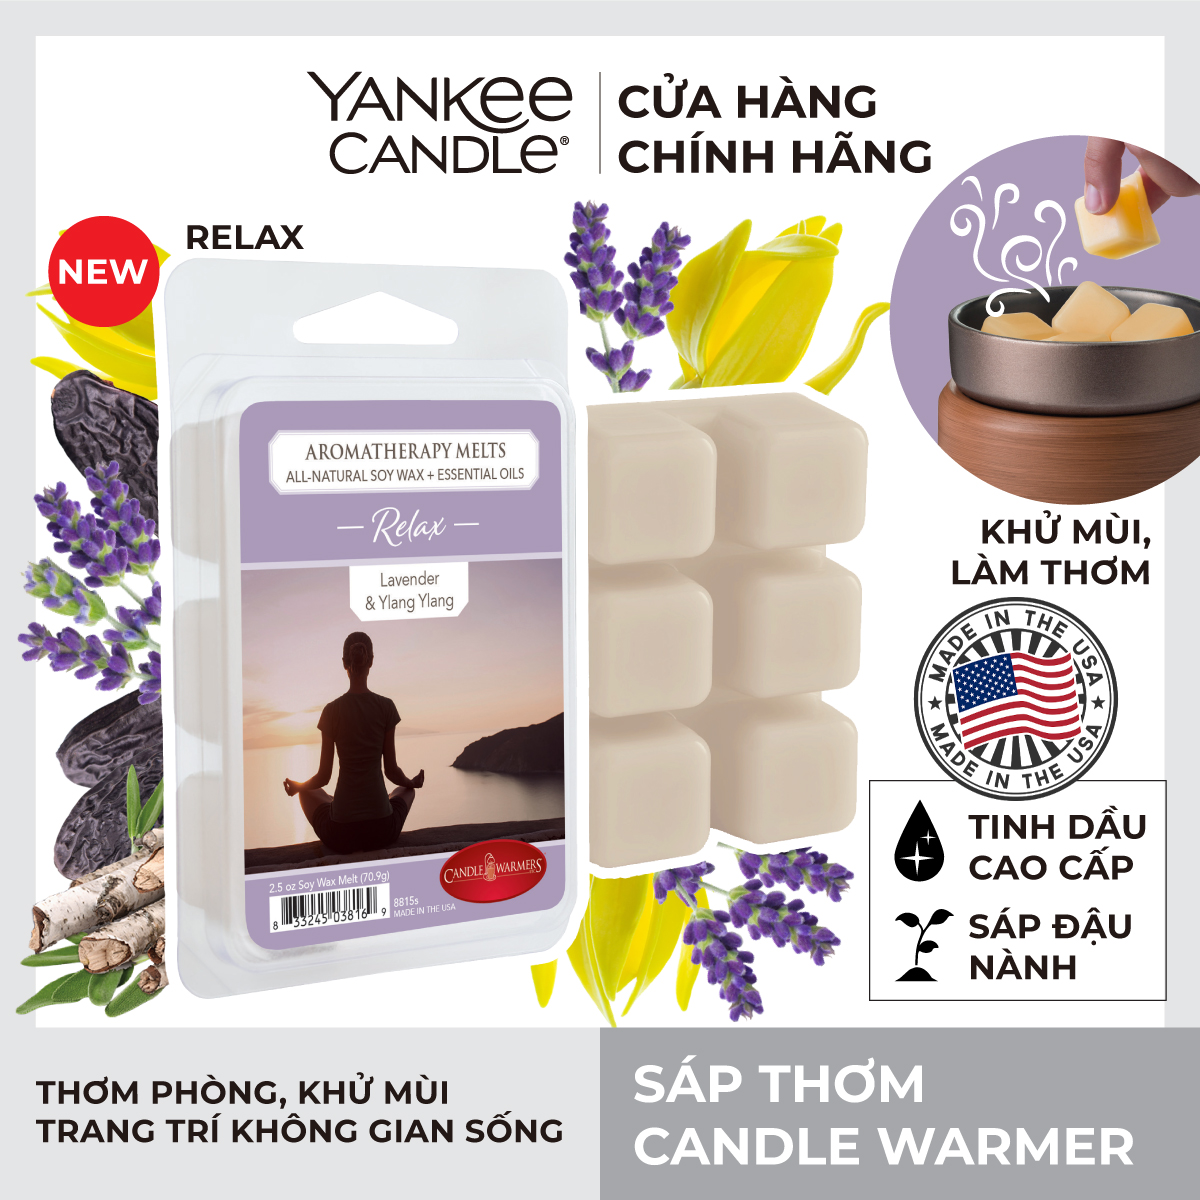 Sáp thơm Candle Warmer - Relax